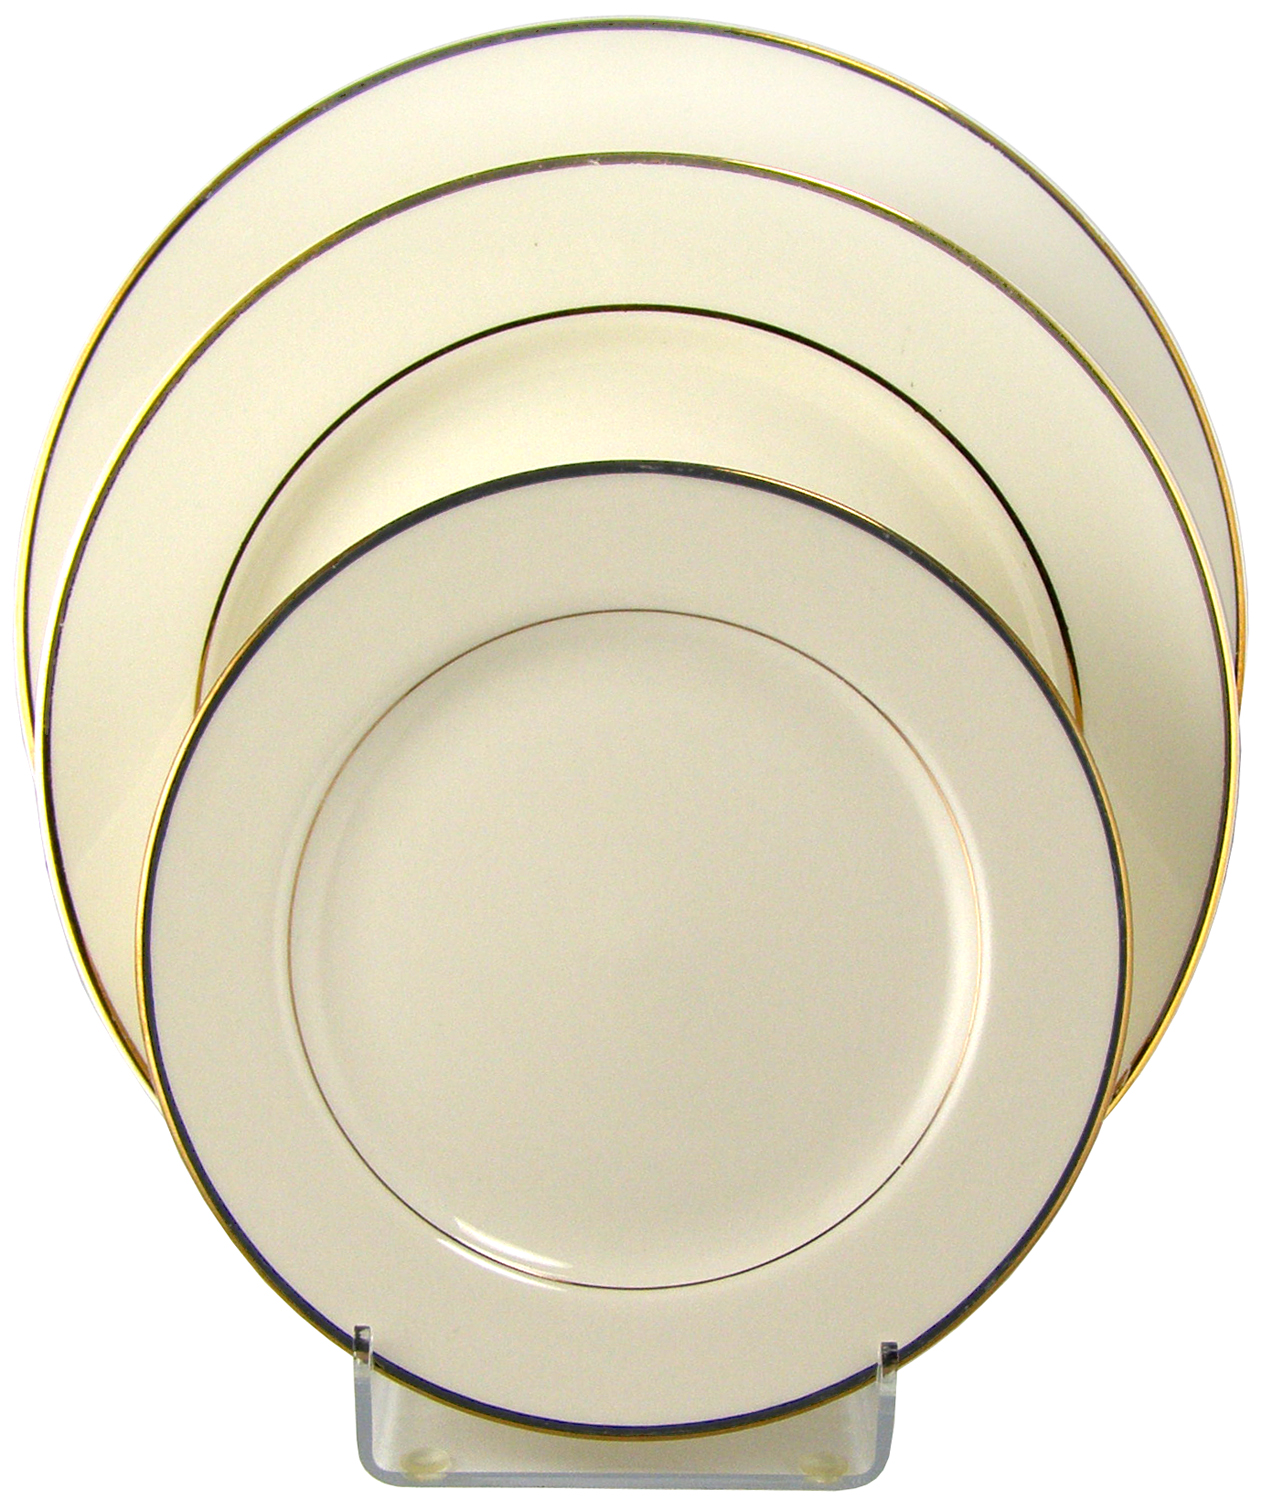 10.5 inch plate